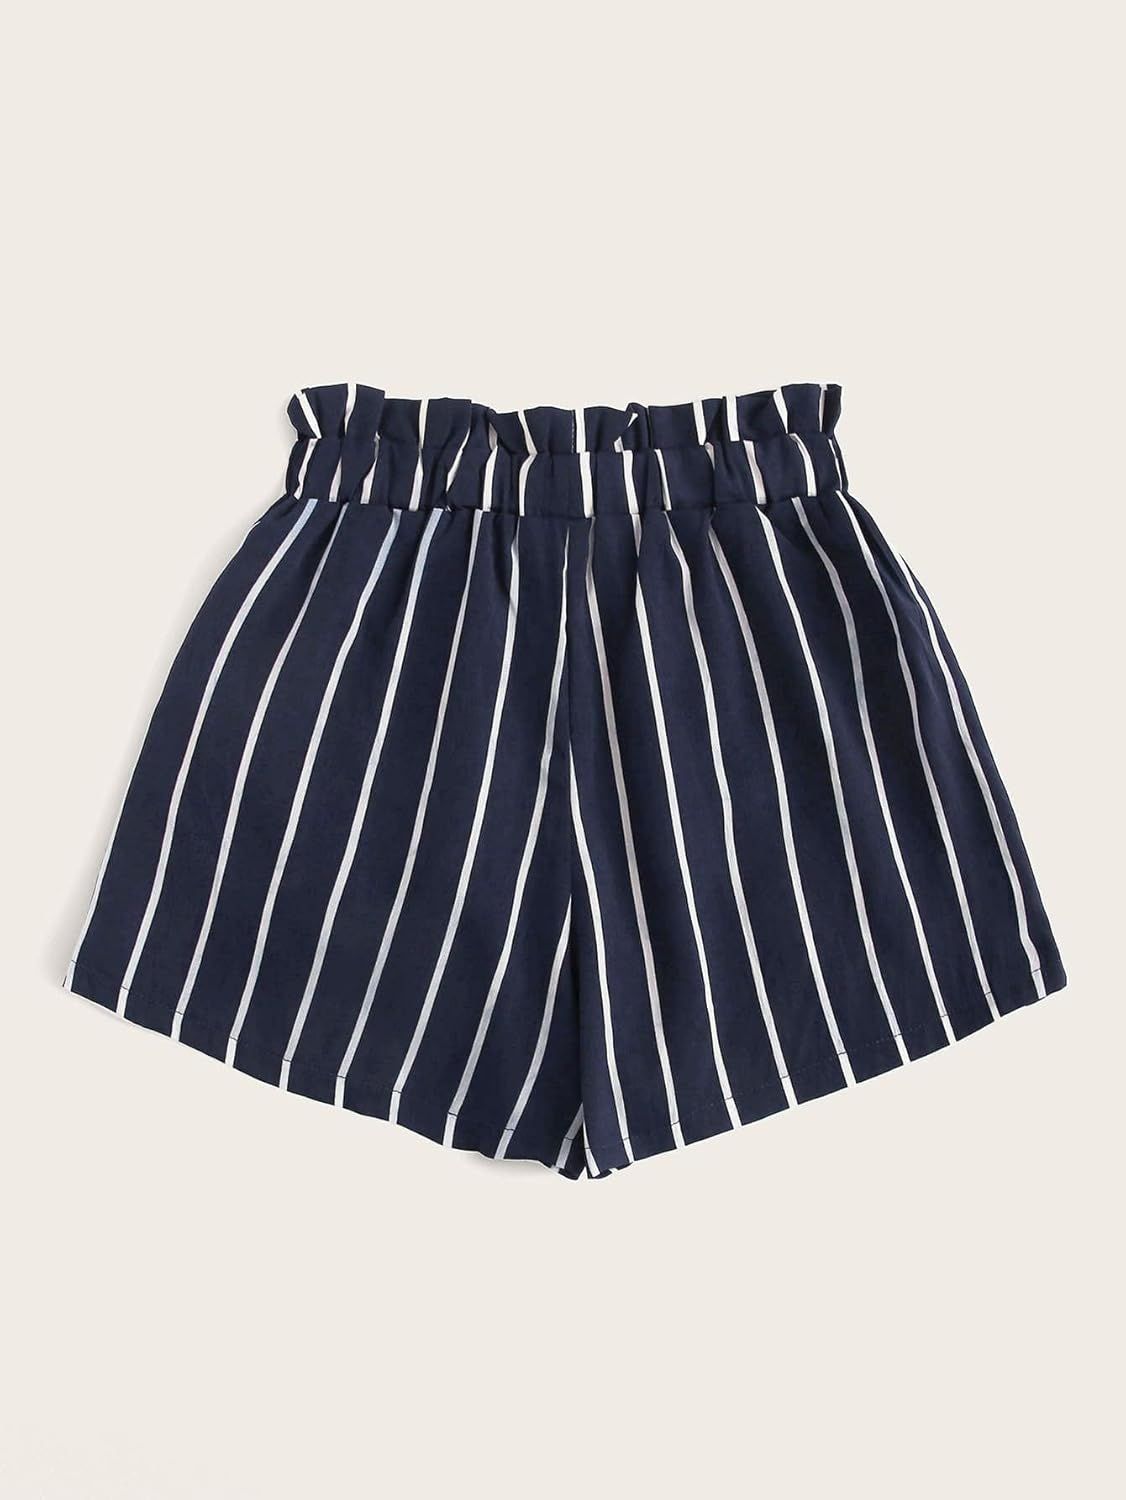 Summer Womens Casual Shorts Striped Self-Tie Paperbag Shorts Home Comfy for Running Office Beach | Amazon (US)